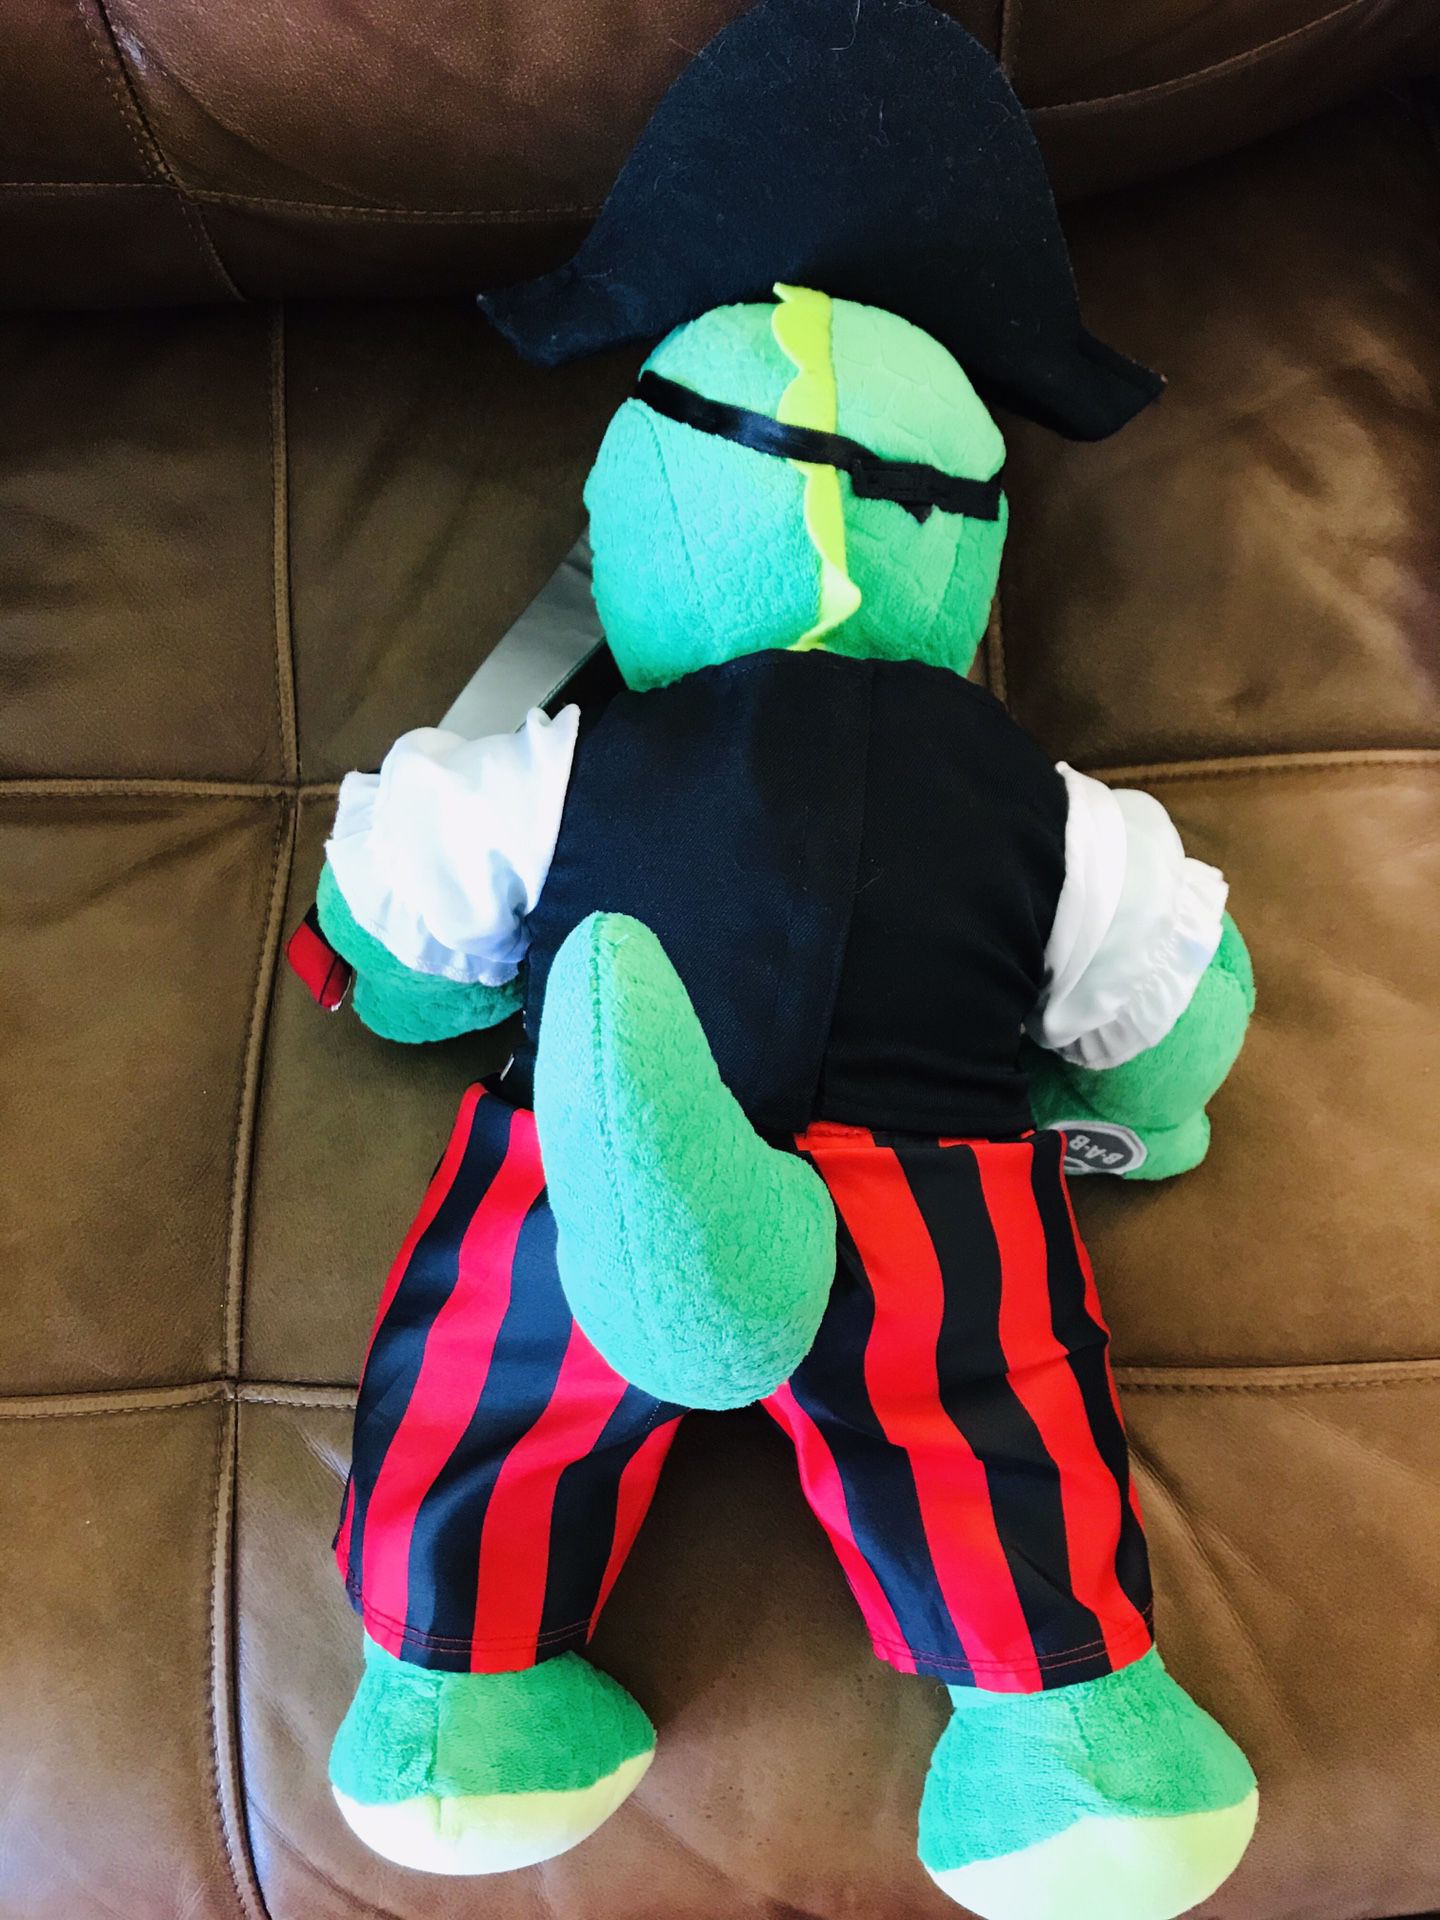 Build a bear workshop alligator Pirate Outfit clothes accessories included Like New! Soft toy stuffed animal or decor